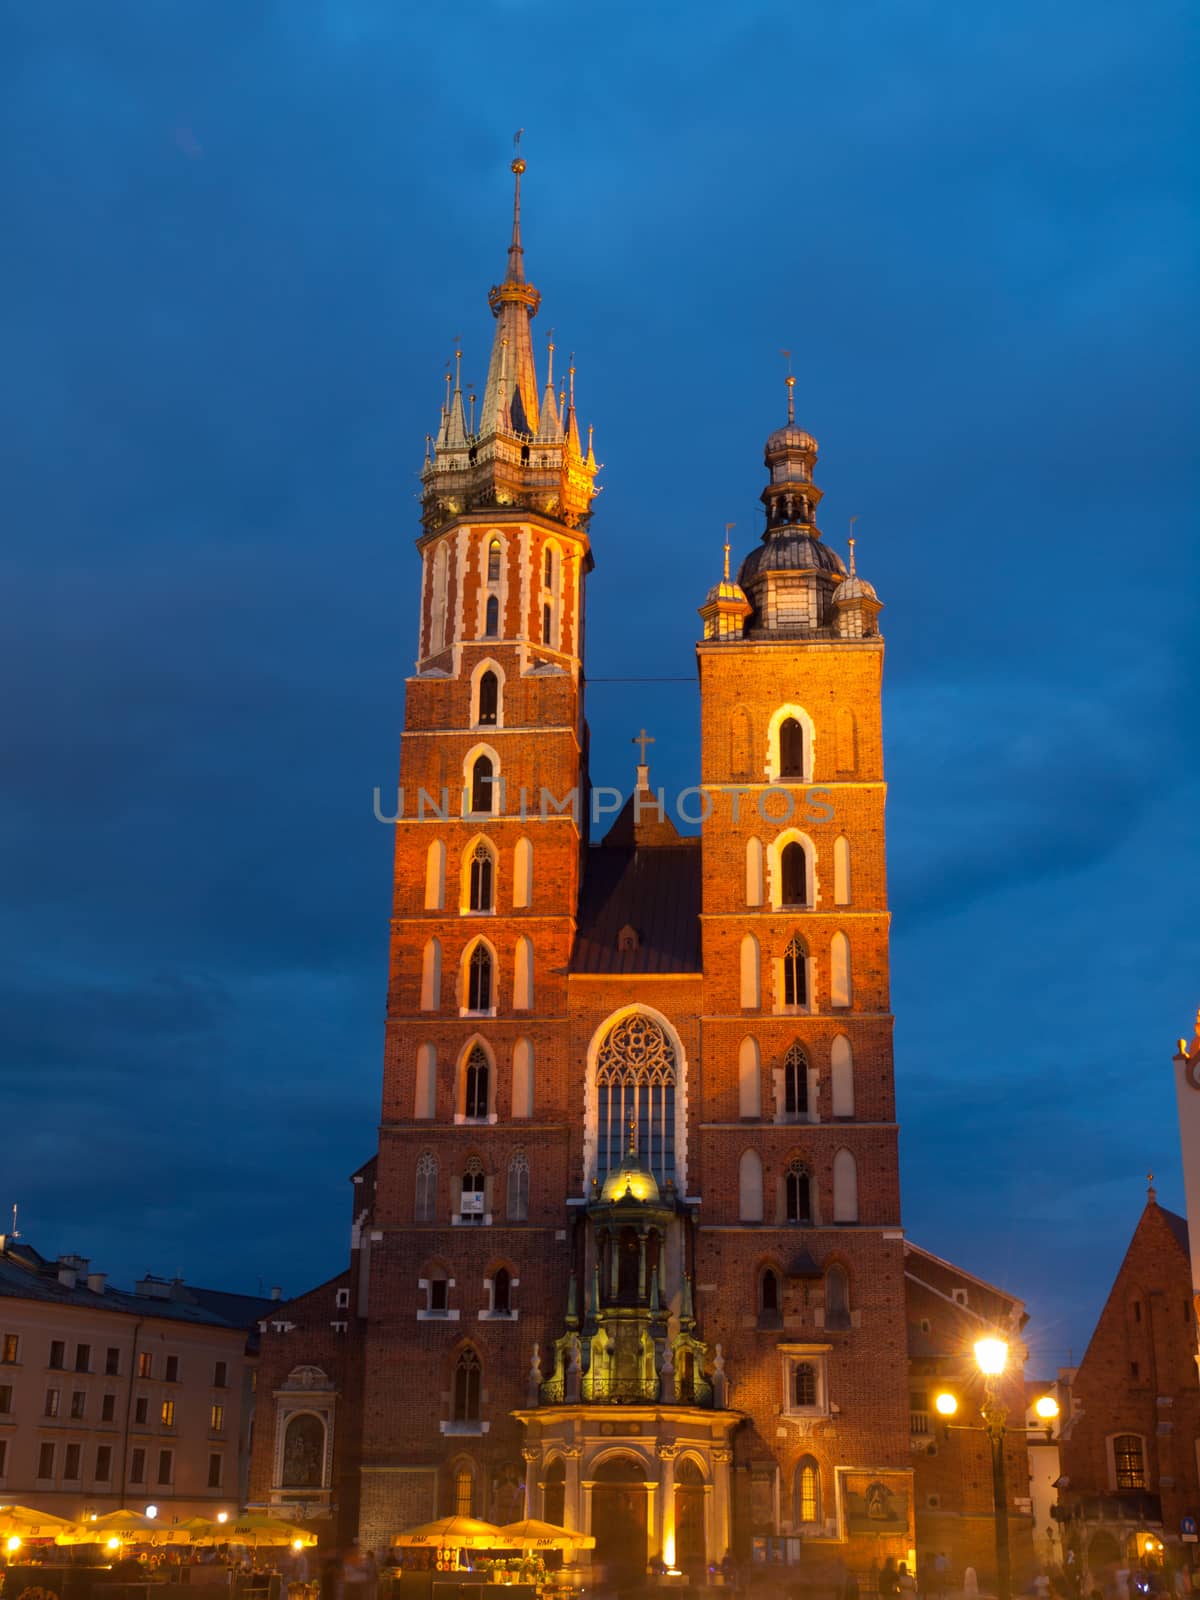 St. Mary's Church in Krakow by night by pyty